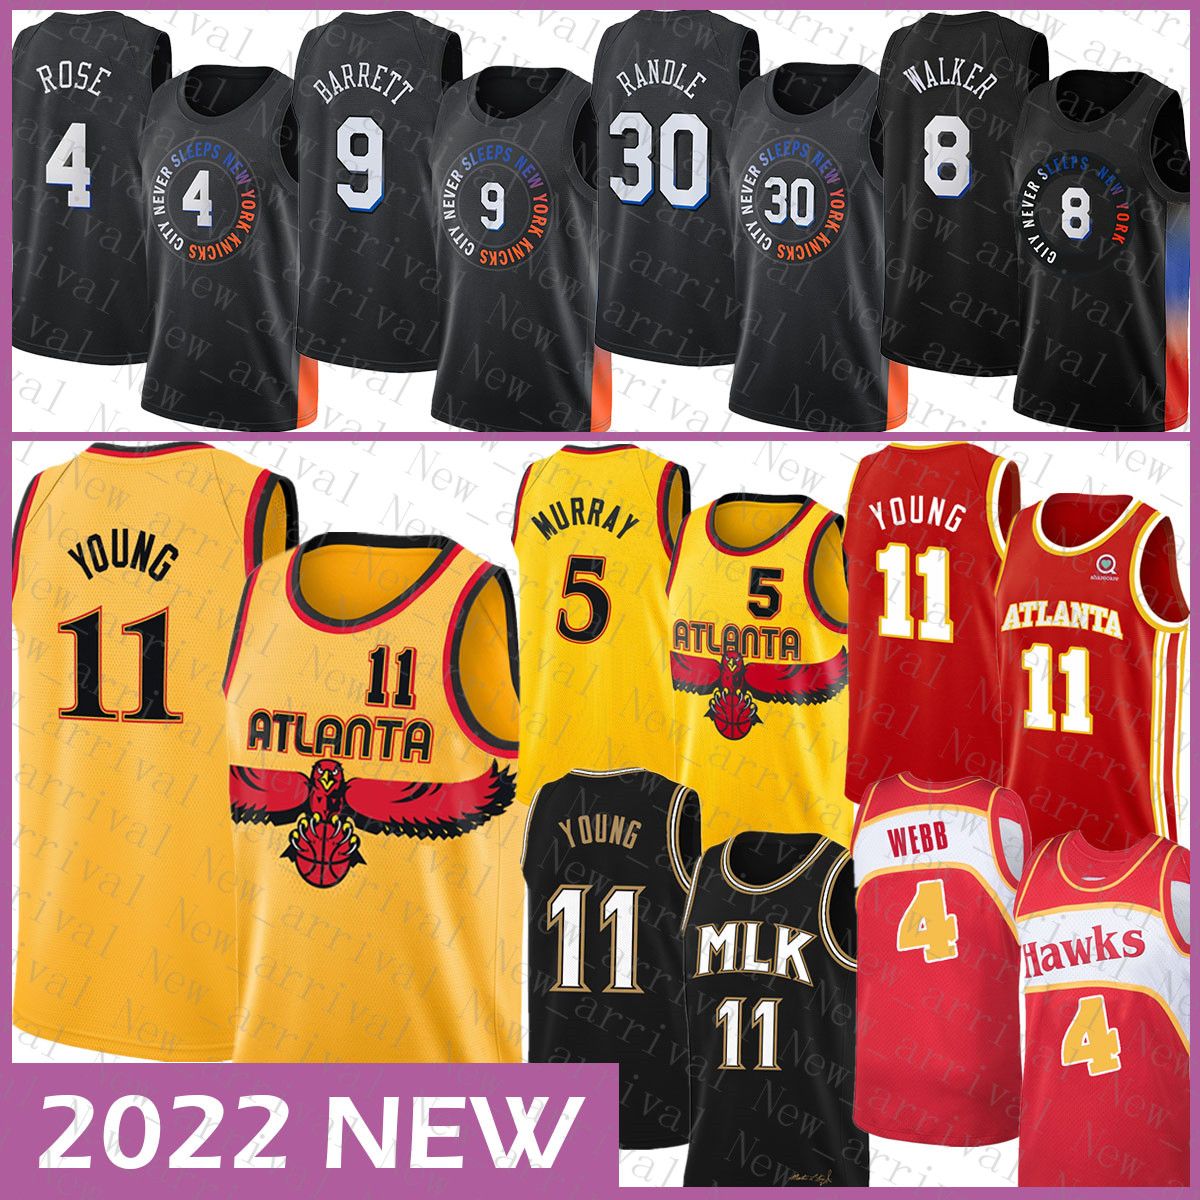 Jerseys set for Games 1 – 4 of Celtics – Hawks first round series